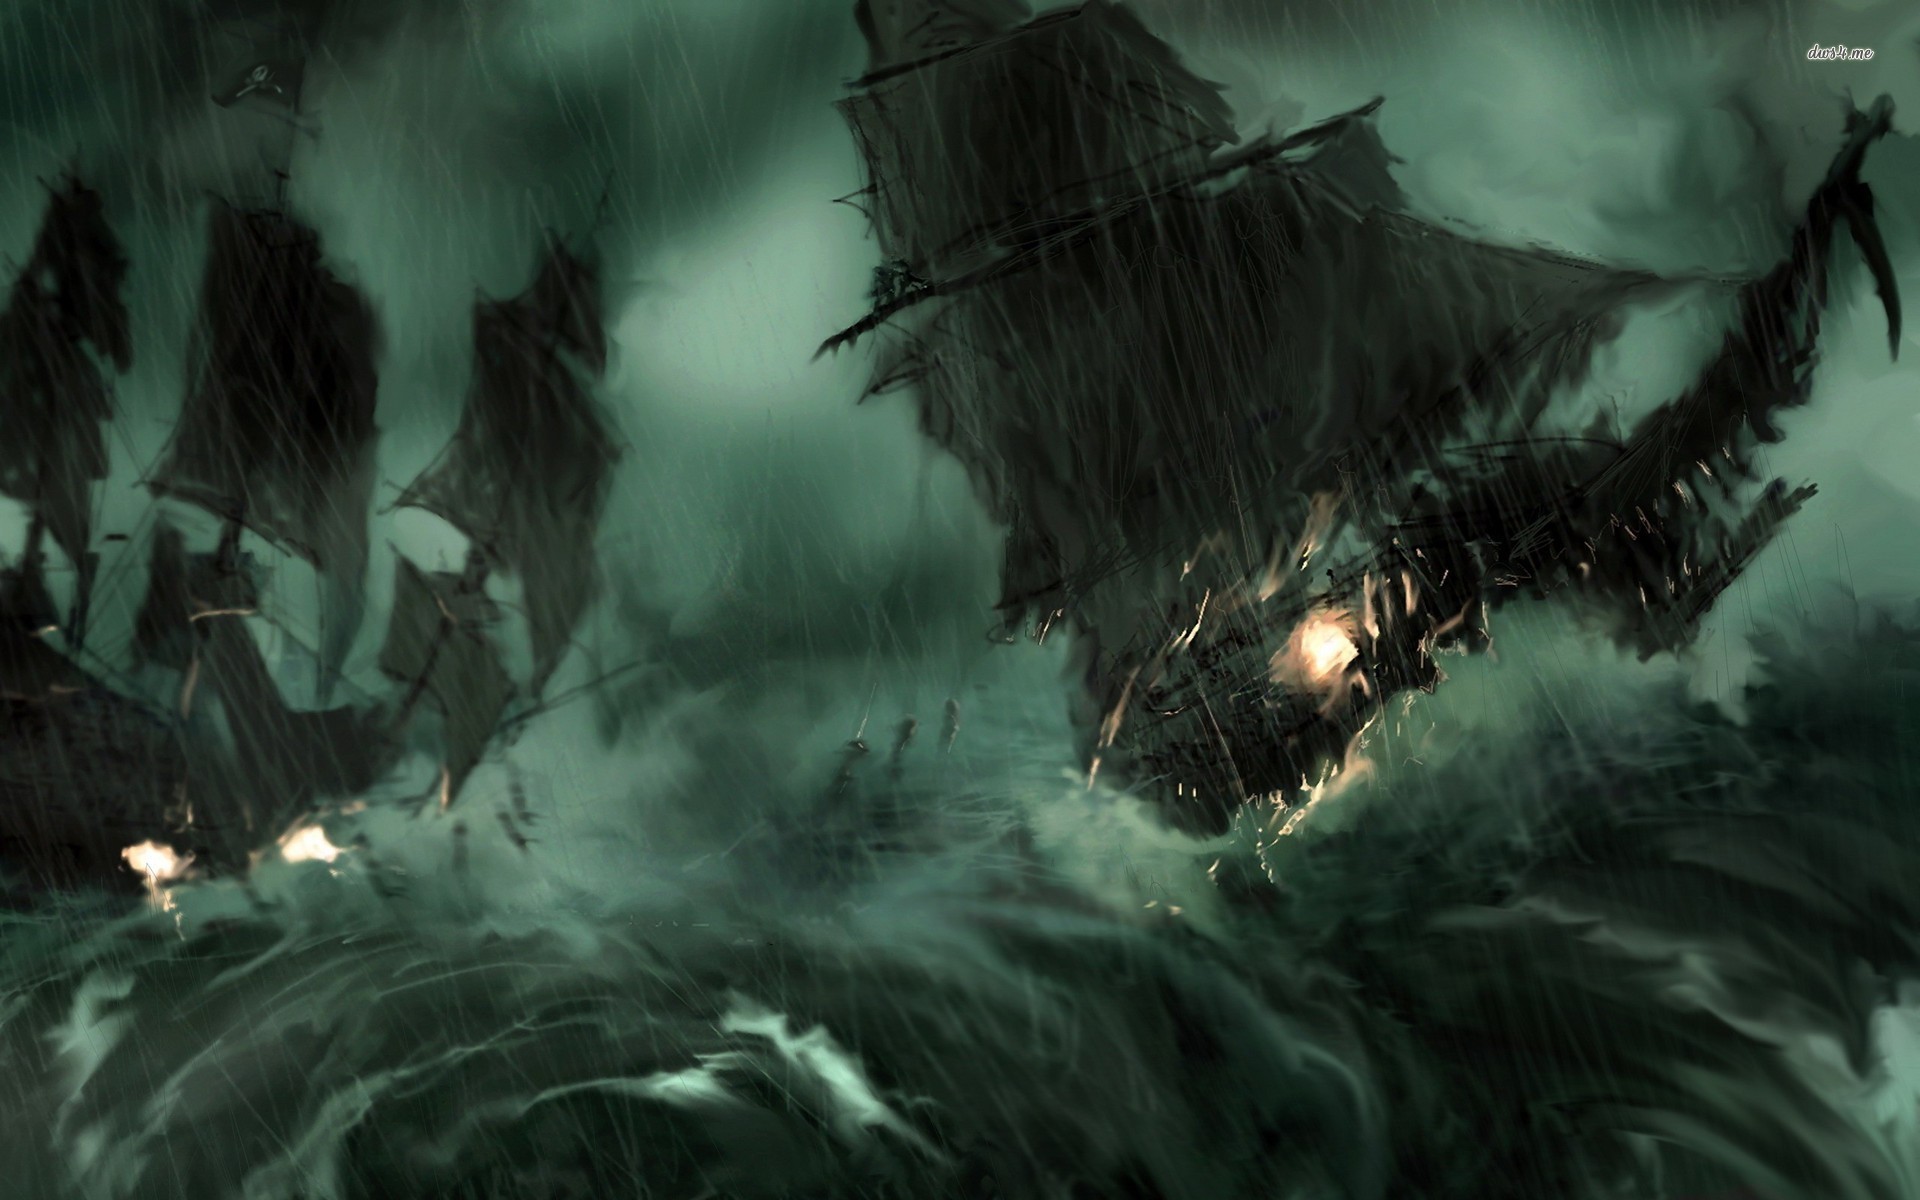 Pirate ship during the storm